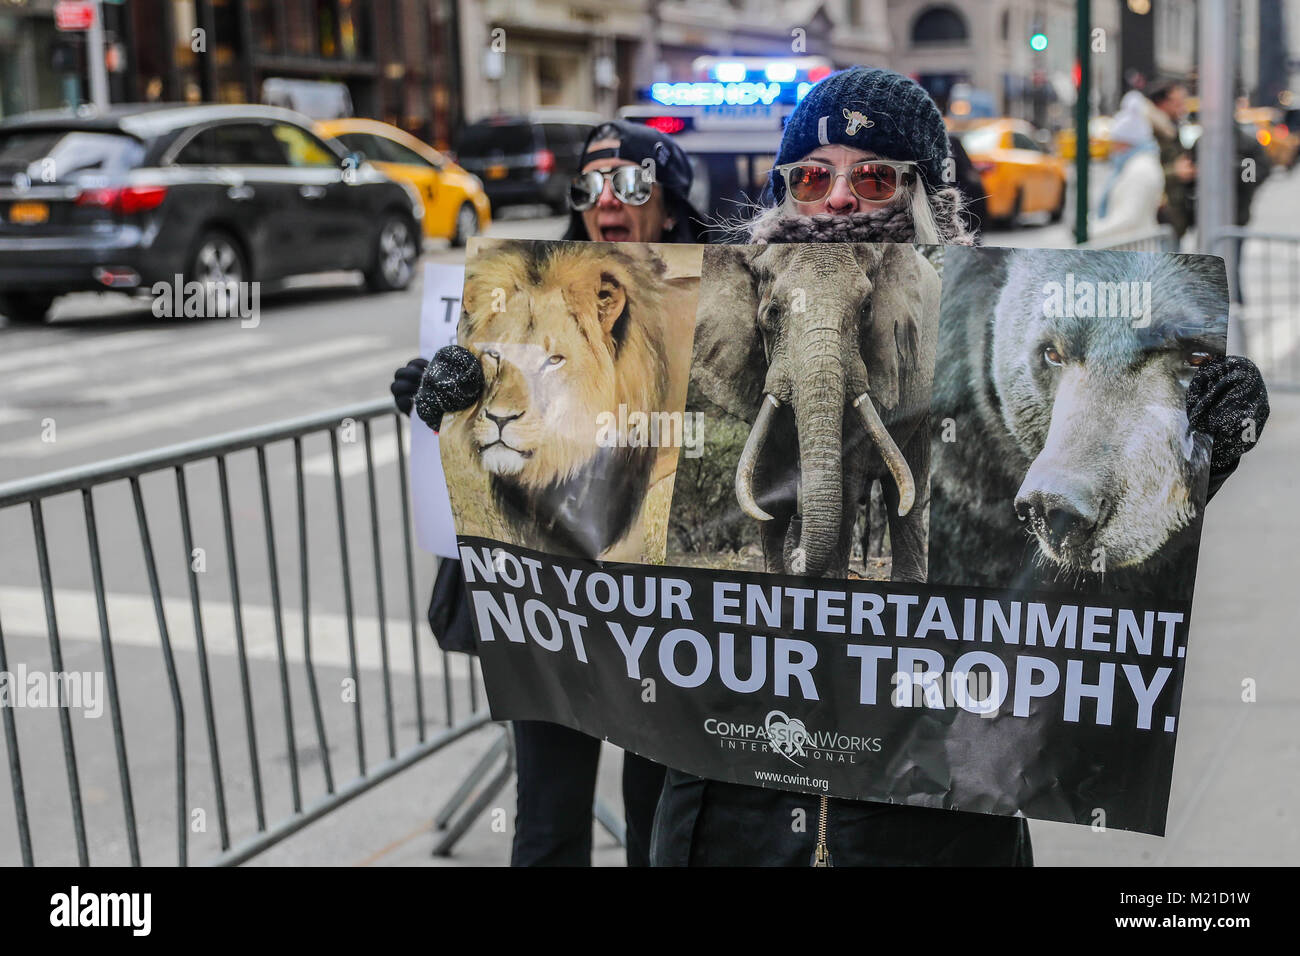 New York animal rights followers will march from Eric Trump's apartment in Central Park South to Trump Tower as part of the World Trophy against Trophy Hunting and in support of African wildlife protection. NYCLASS recently sent a letter to Lara Trump, who stood as an animal advocate, urging her to urge her husband Eric Trump and brother-in-law Donald Trump Jr. to stop hunting for the trophy. The act takes place in Manhattan New York this Saturday, 03.  (Photo: William Volcov) Credit: Brazil Photo Press/Alamy Live News Stock Photo